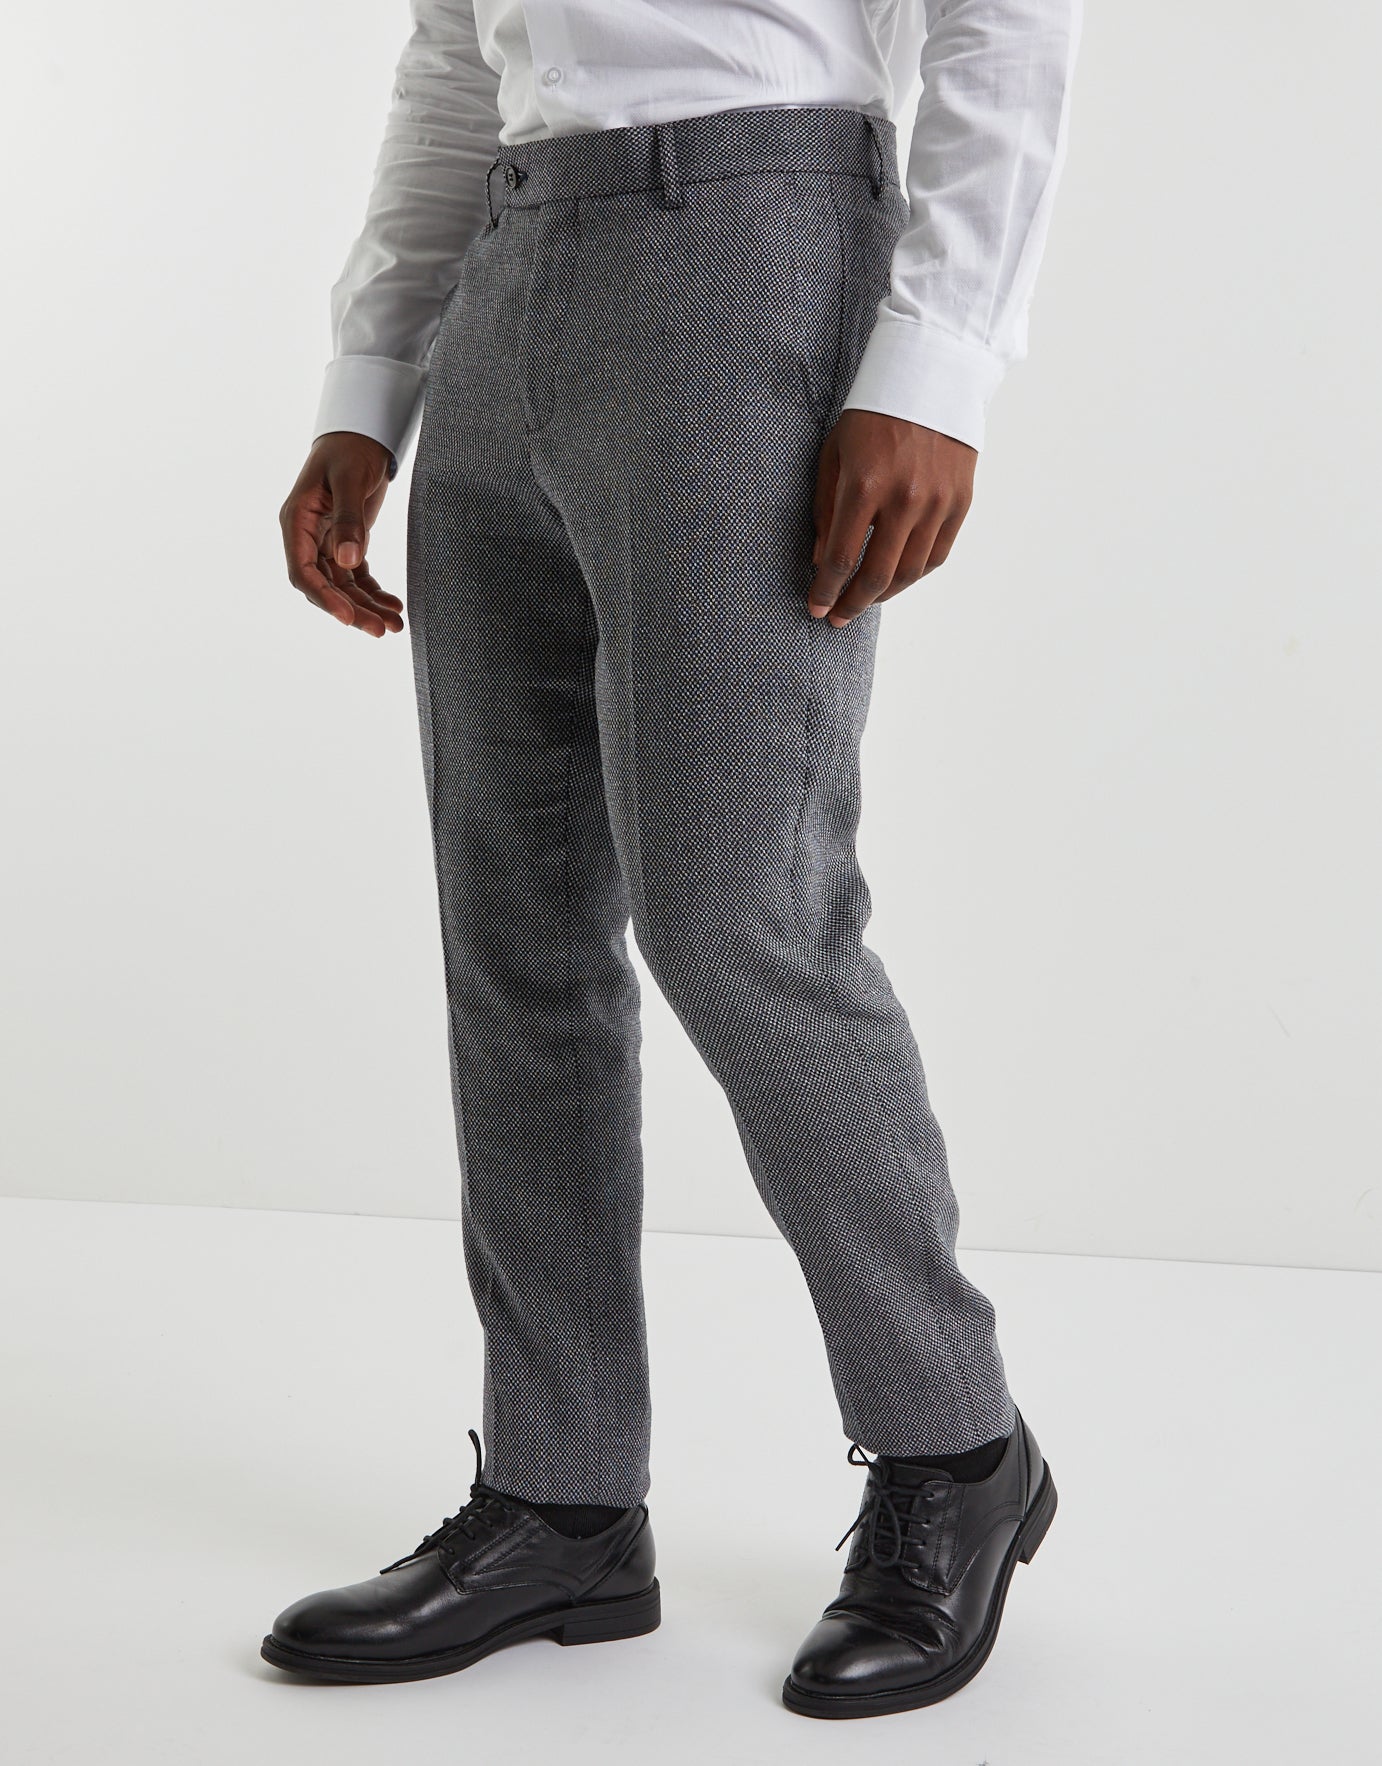 The Oyster Linen Suit (Oyster Linen) – Holland Cooper ®